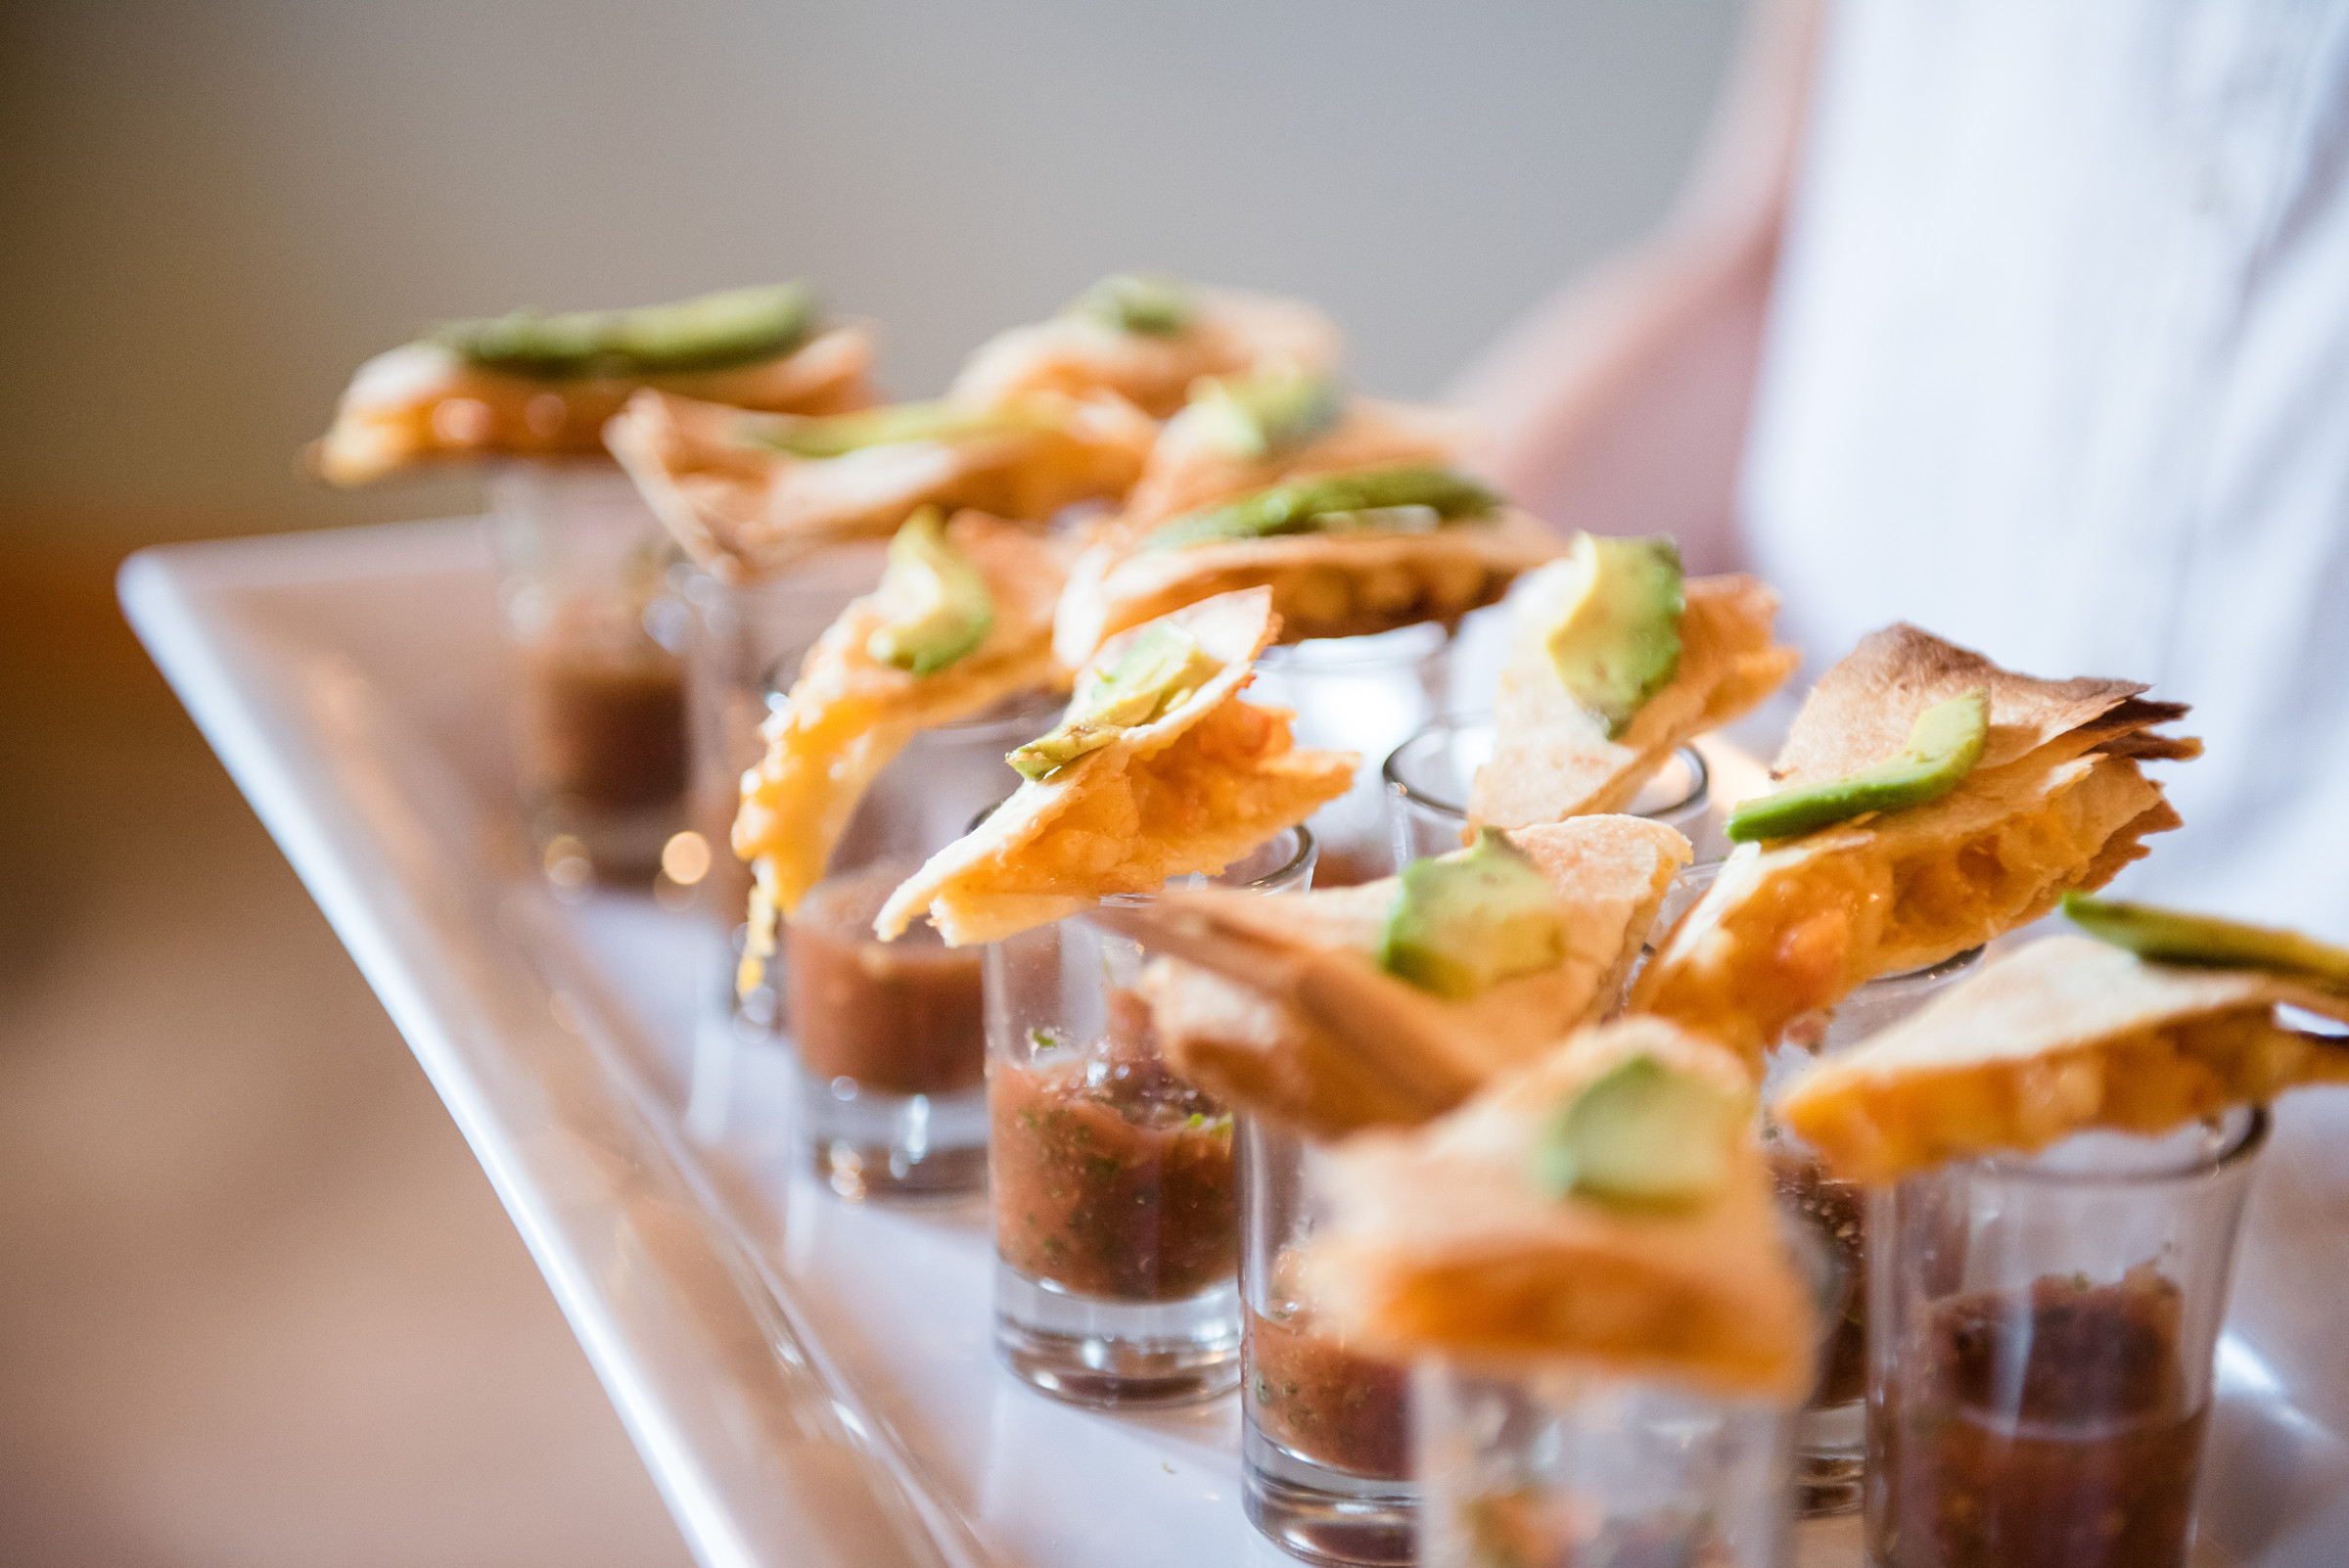 Denver Wedding Caterer Advice: Direct From the Pros